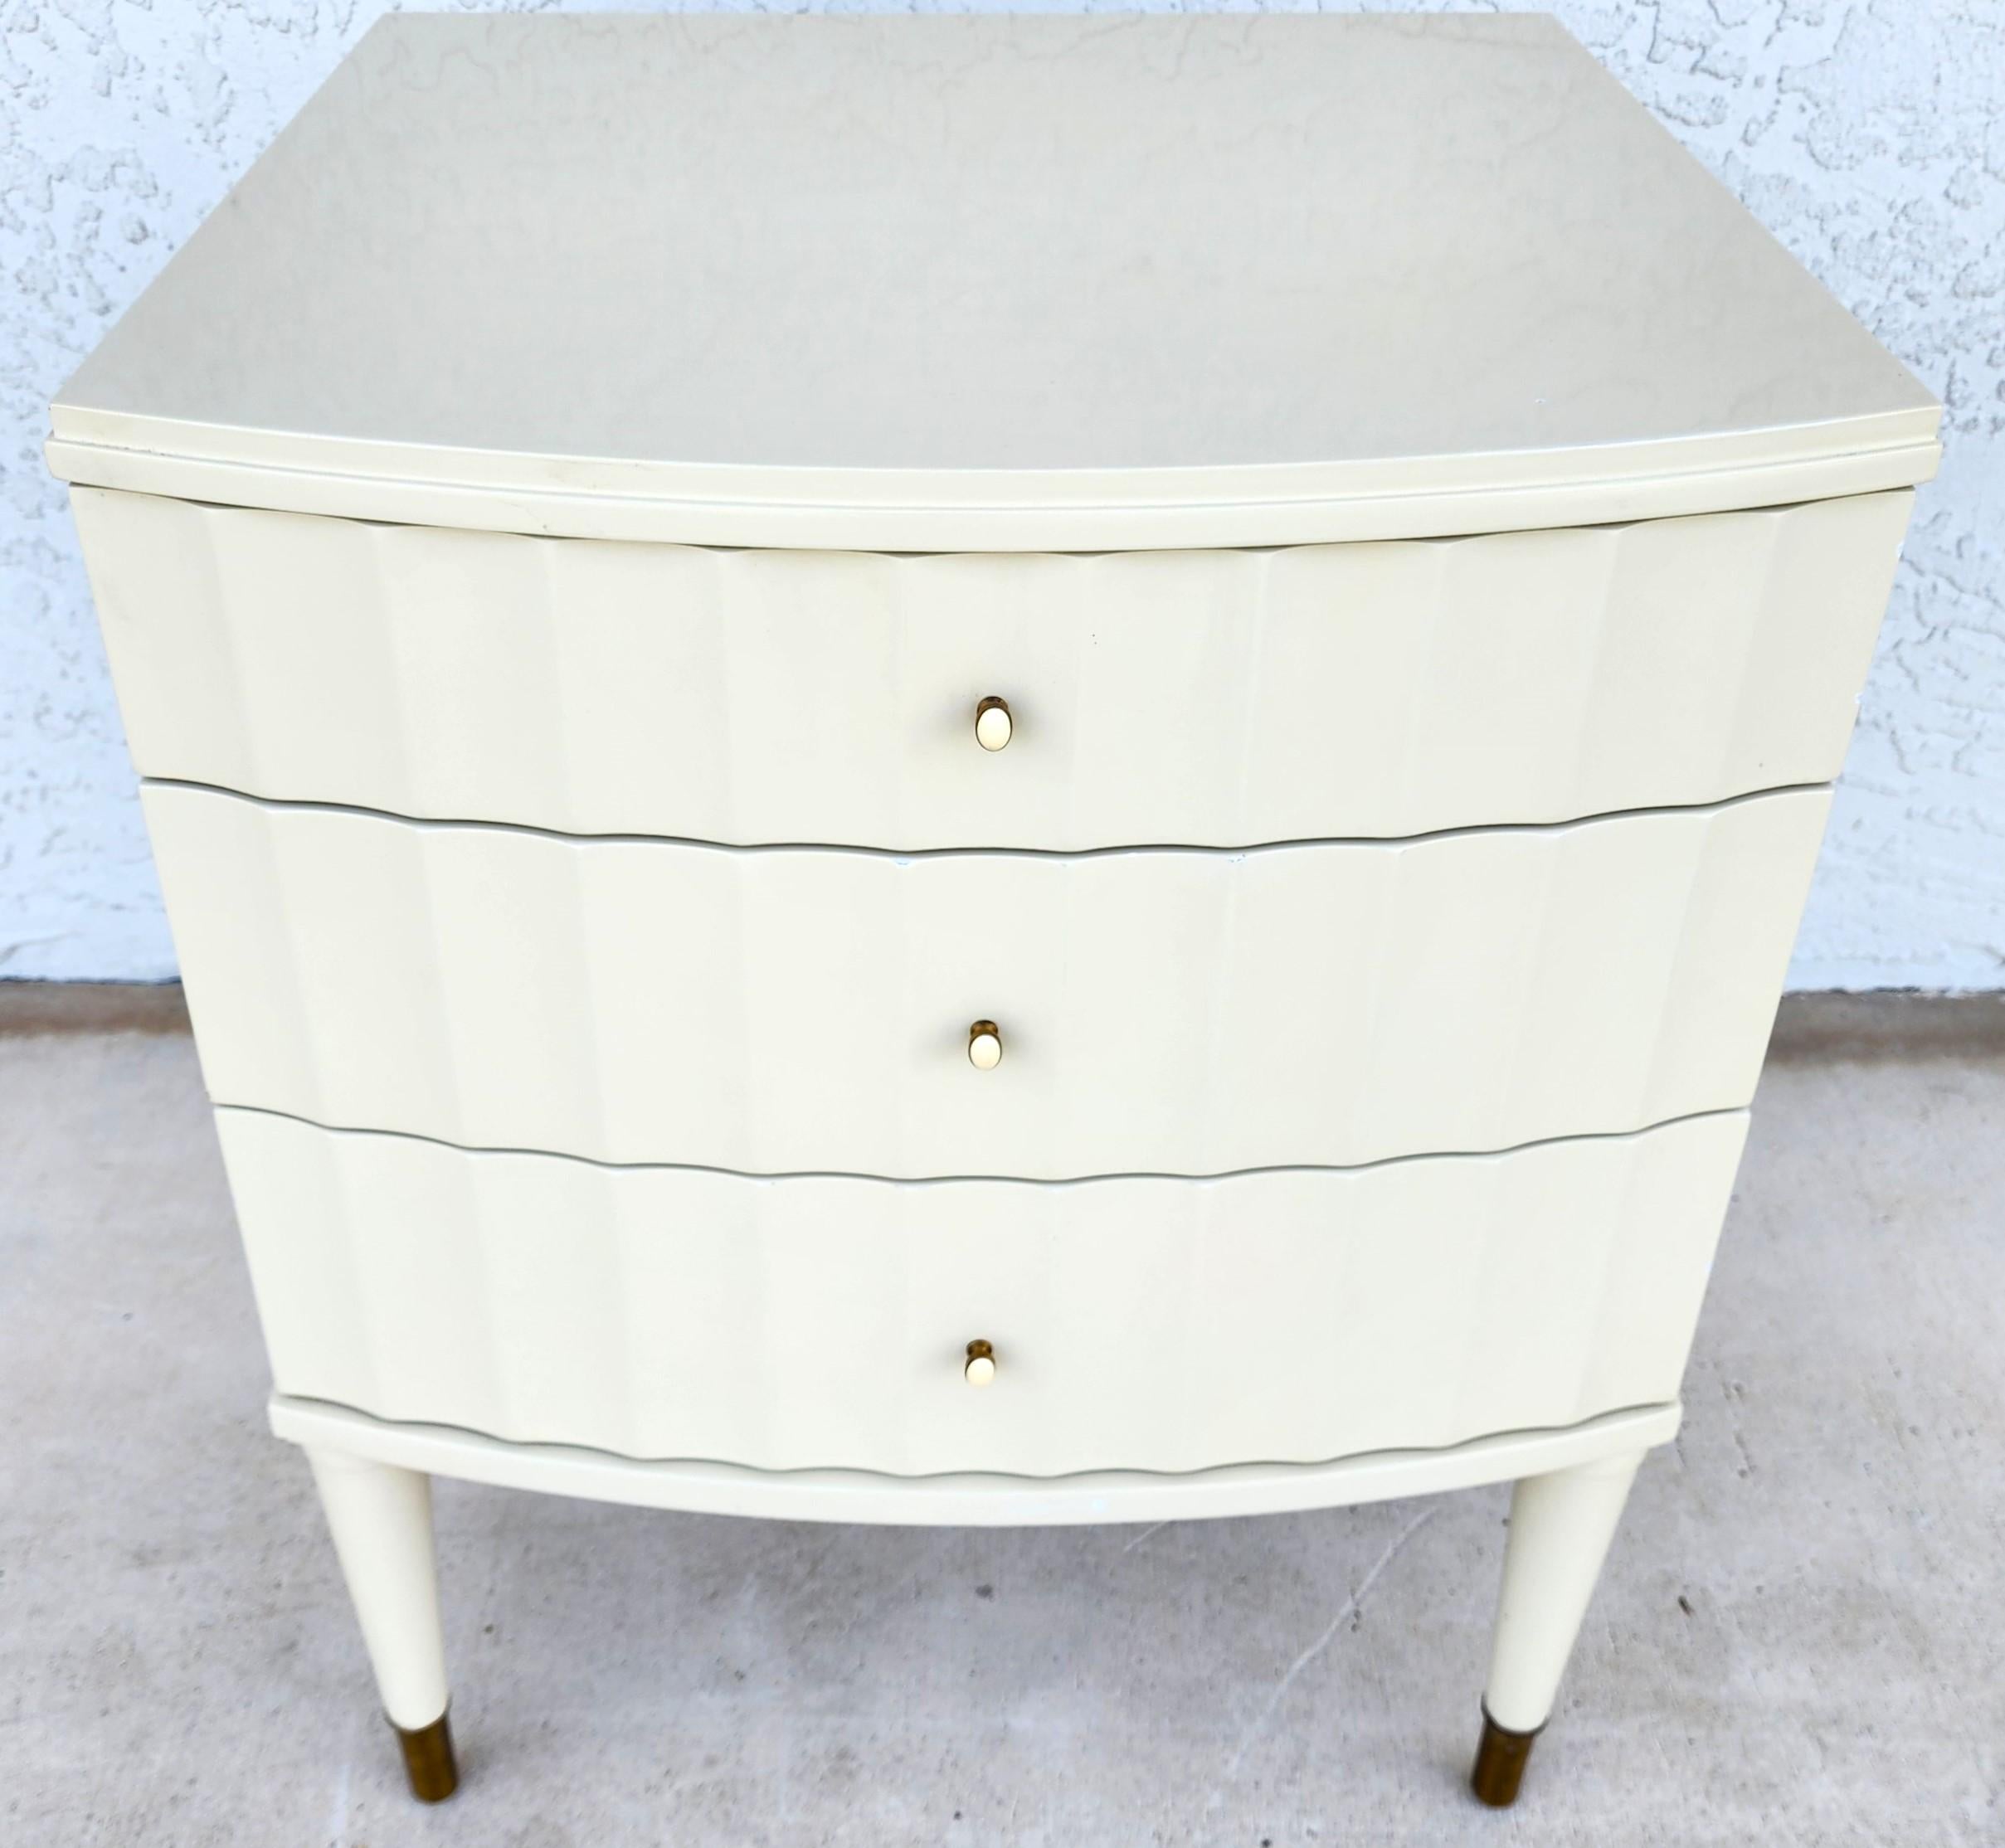 For FULL item description click on CONTINUE READING at the bottom of this page.

Offering One Of Our Recent Palm Beach Estate Fine Furniture Acquisitions Of A
BARBARA BARRY for HENREDON Bedside Table Nightstand

Approximate Measurements in